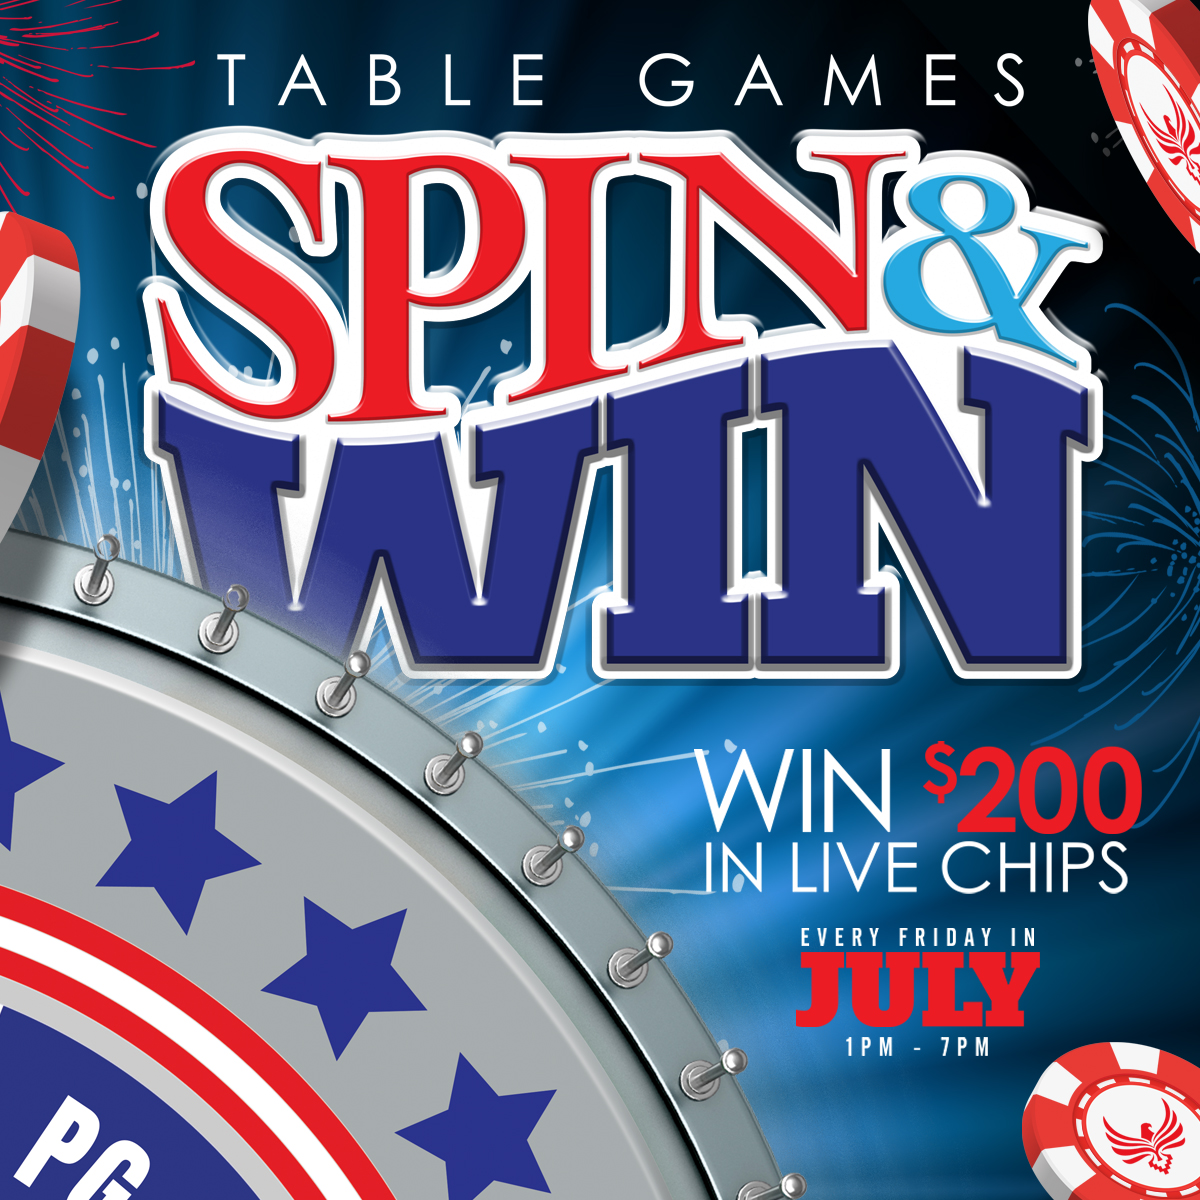 Roll to Win Craps advertisement photo of craps table